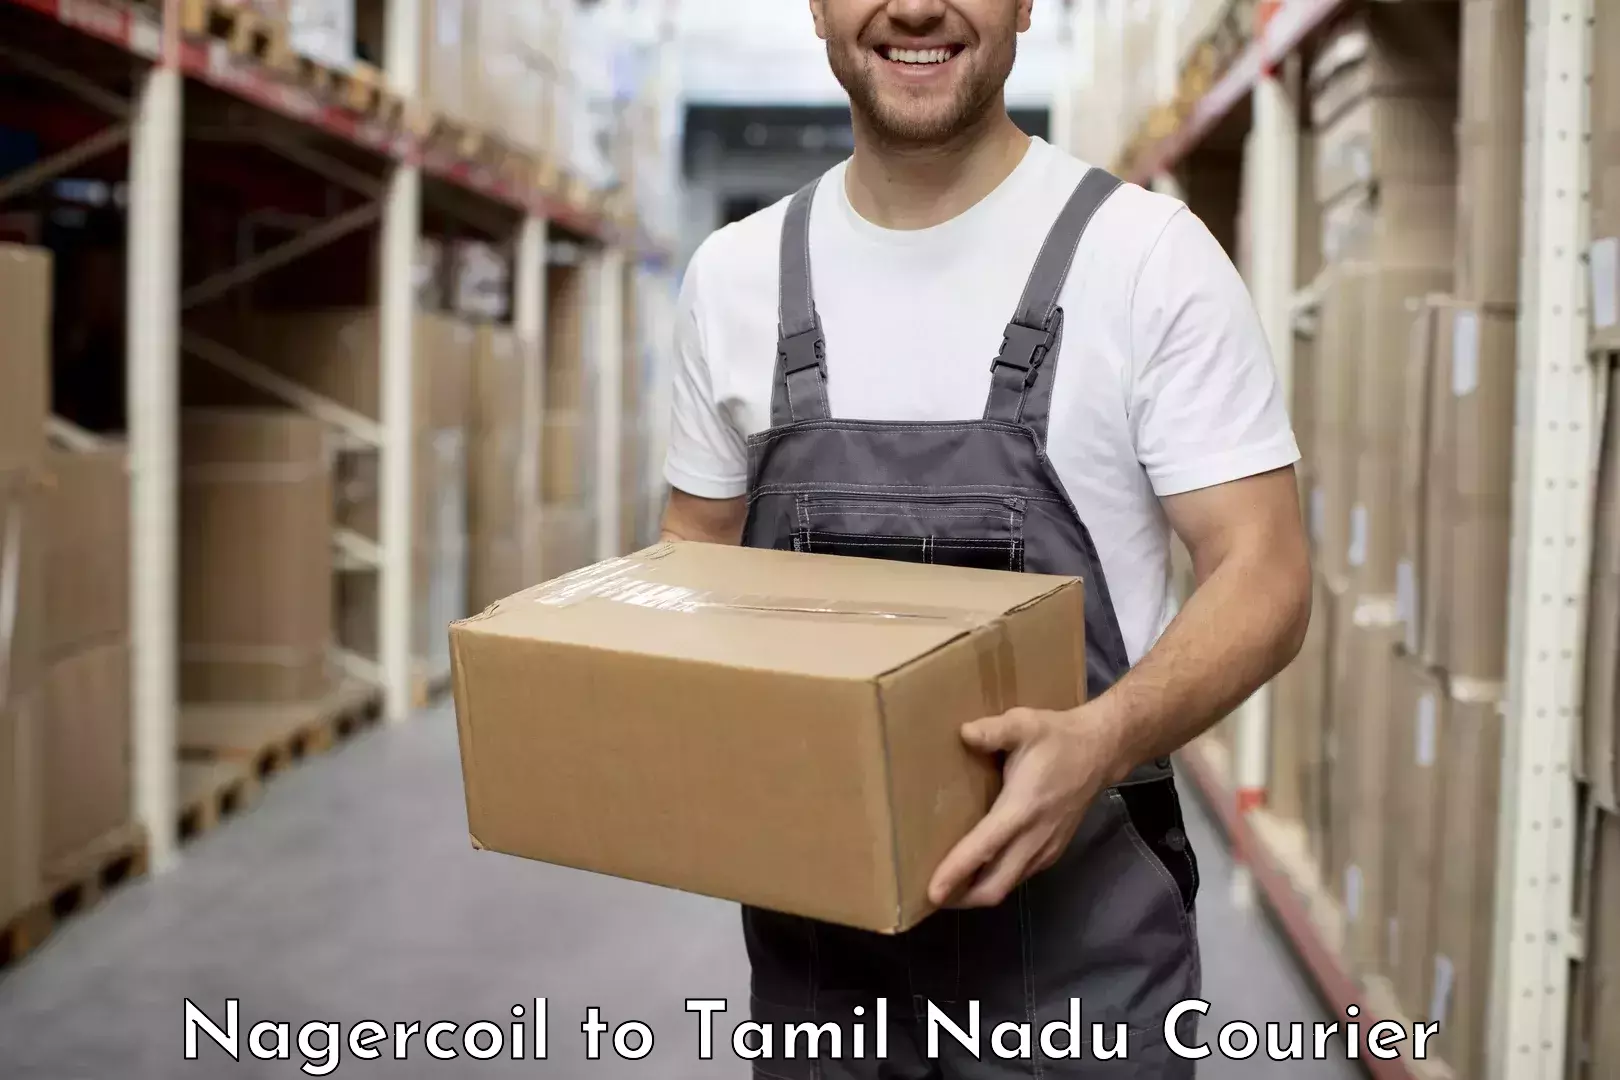 Courier service partnerships Nagercoil to Coimbatore